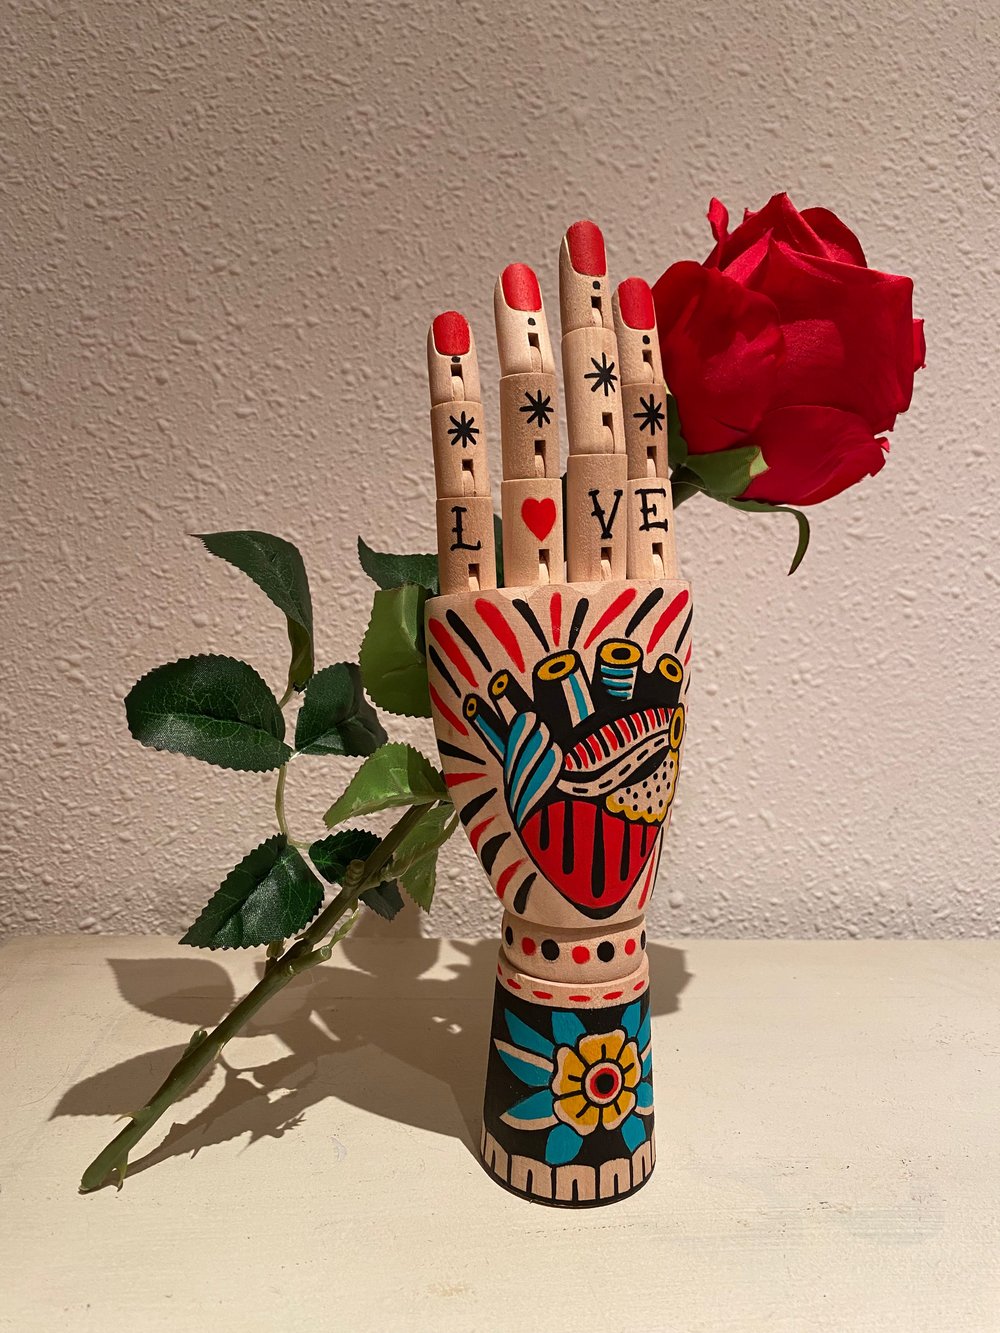 Hand with Rose / Acrylic on wood